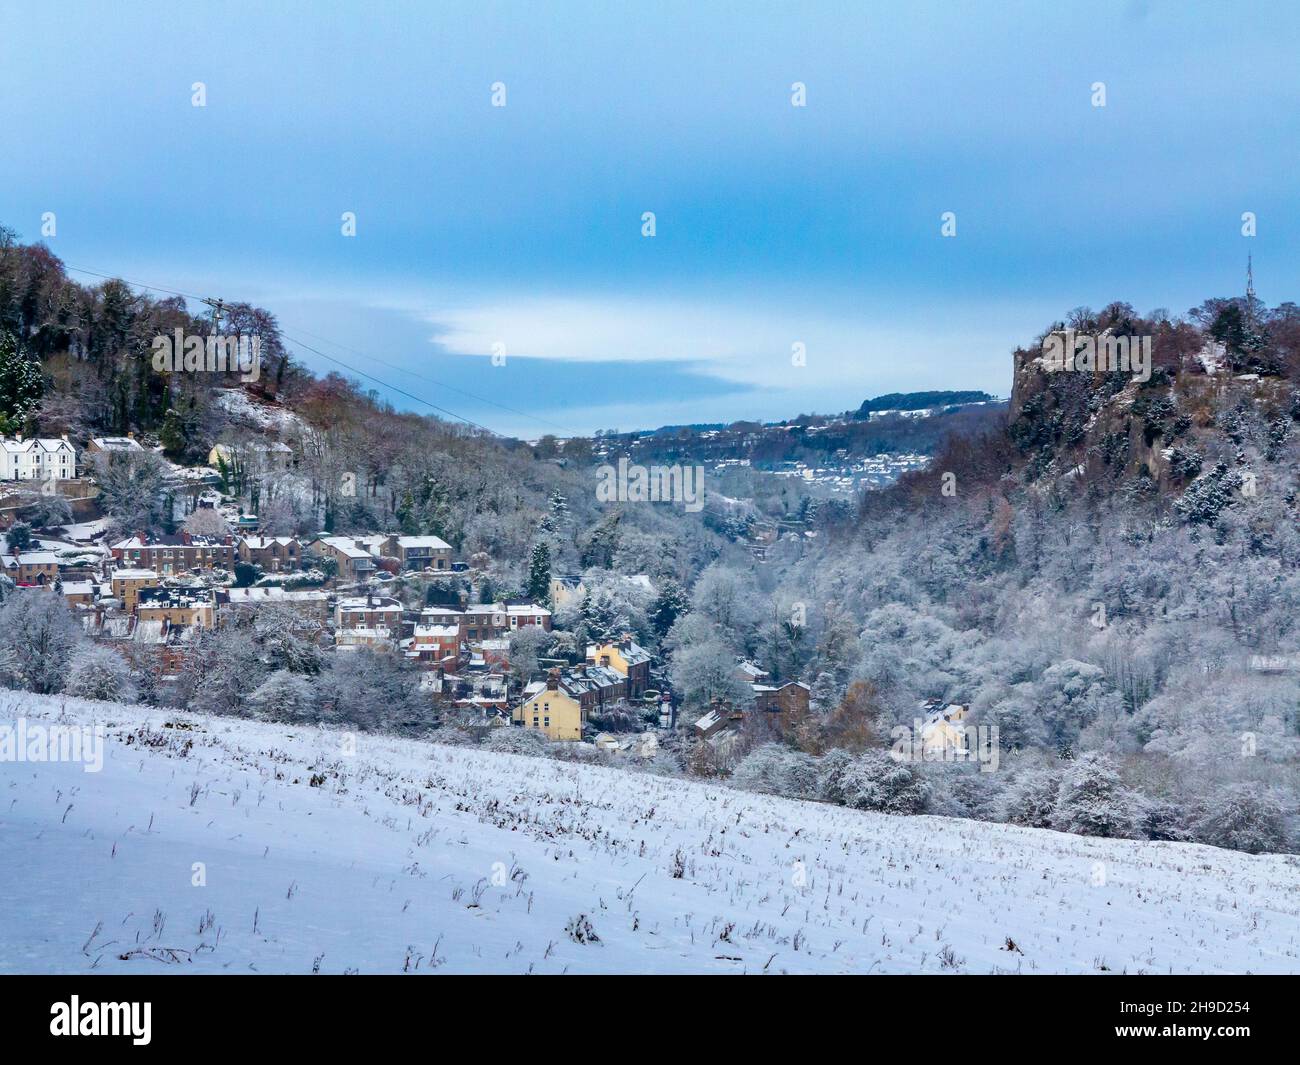 Snow covered landscape with trees at Matlock Bath in the Derbyshire Peak District England UK with High Tor visible in the distance. Stock Photo